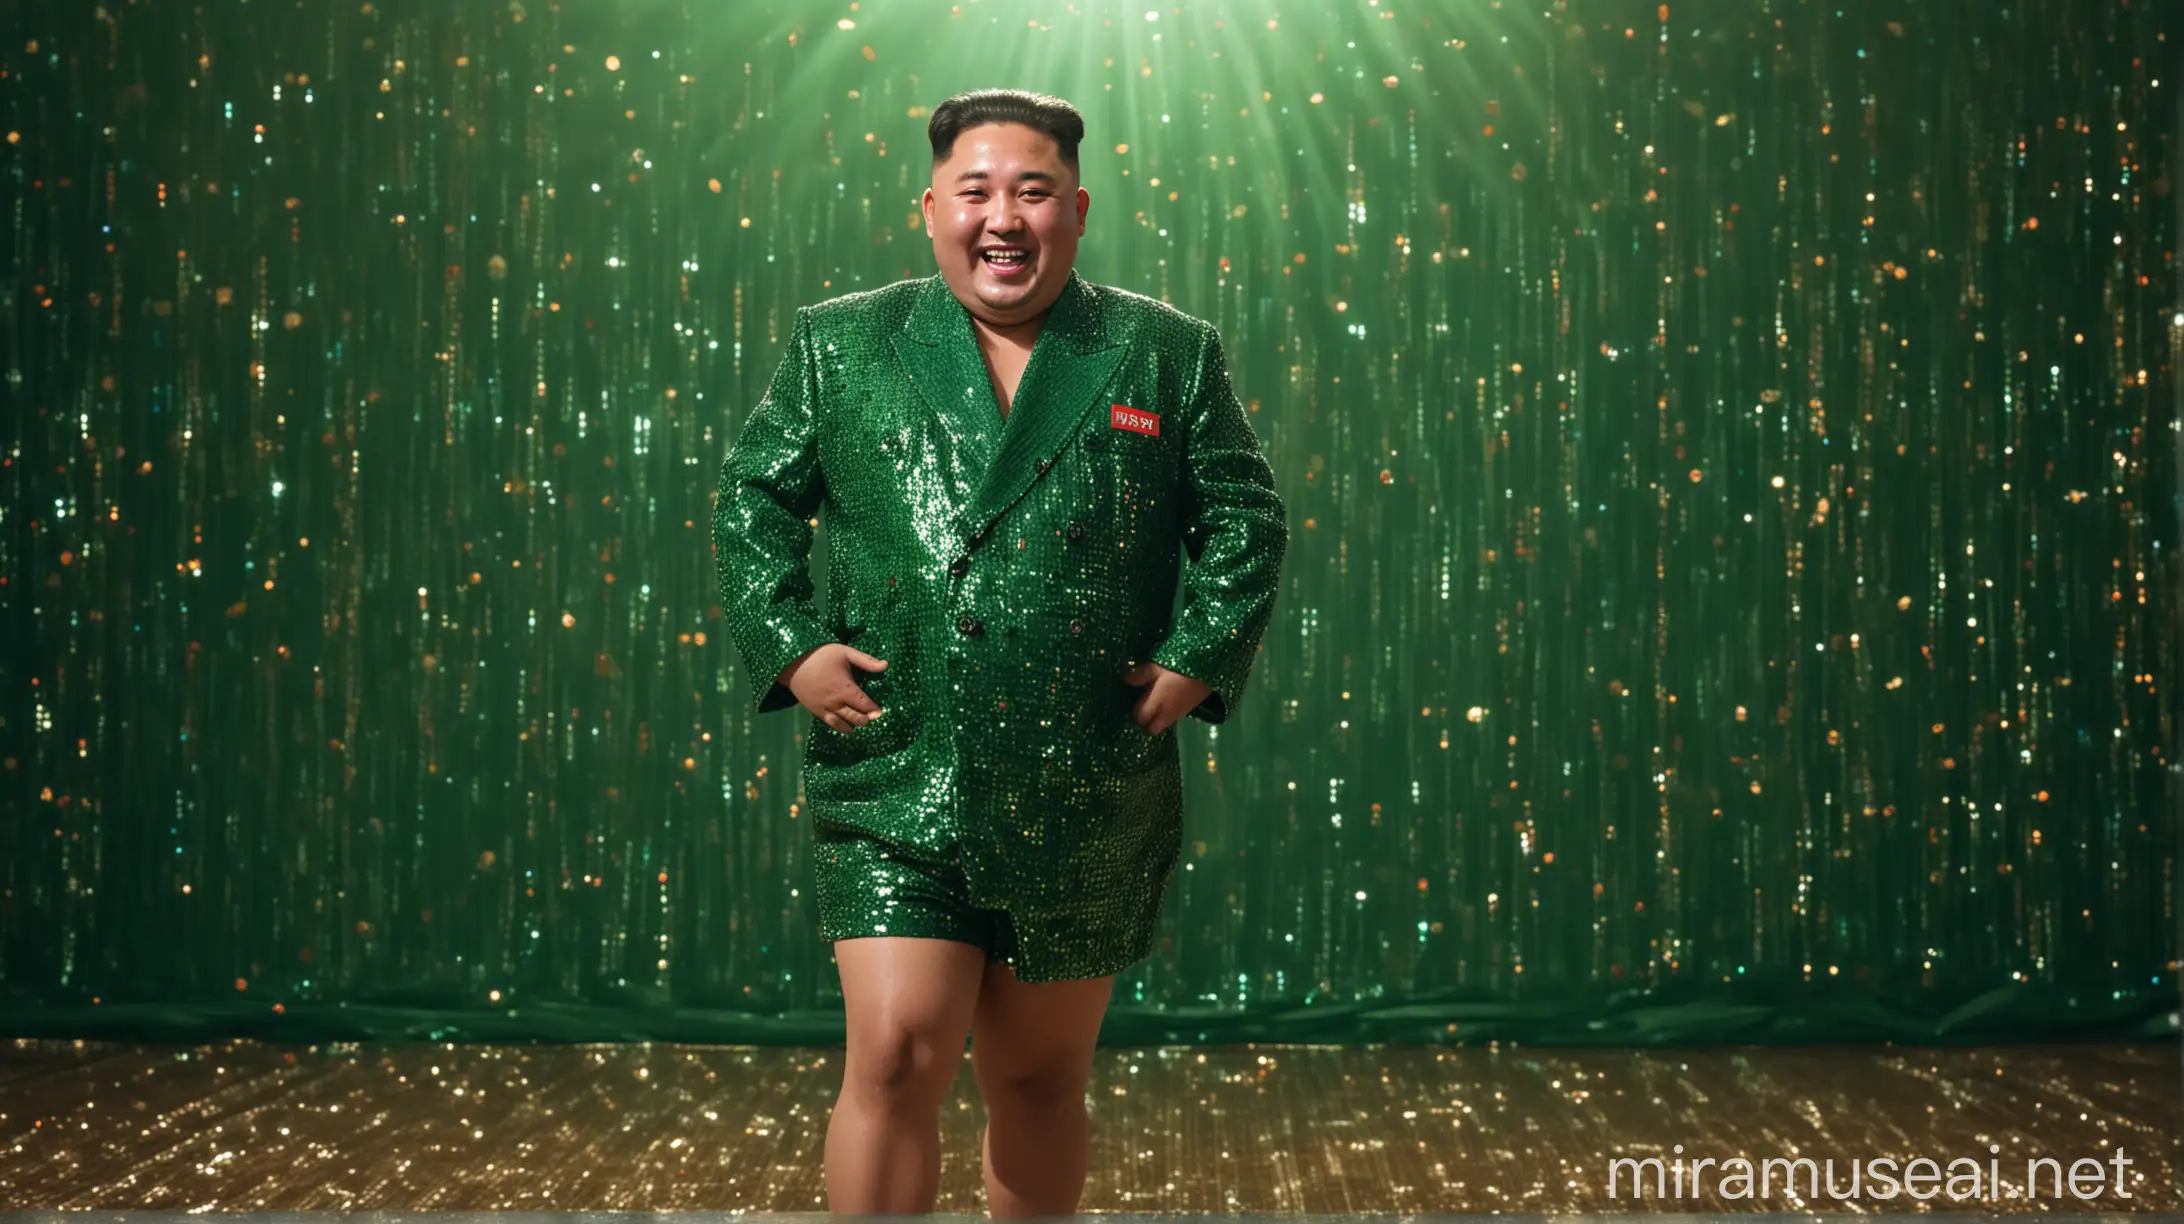 Kim Jong Un Green Sequined Outfit Supreme Leader Poses on Dance Floor